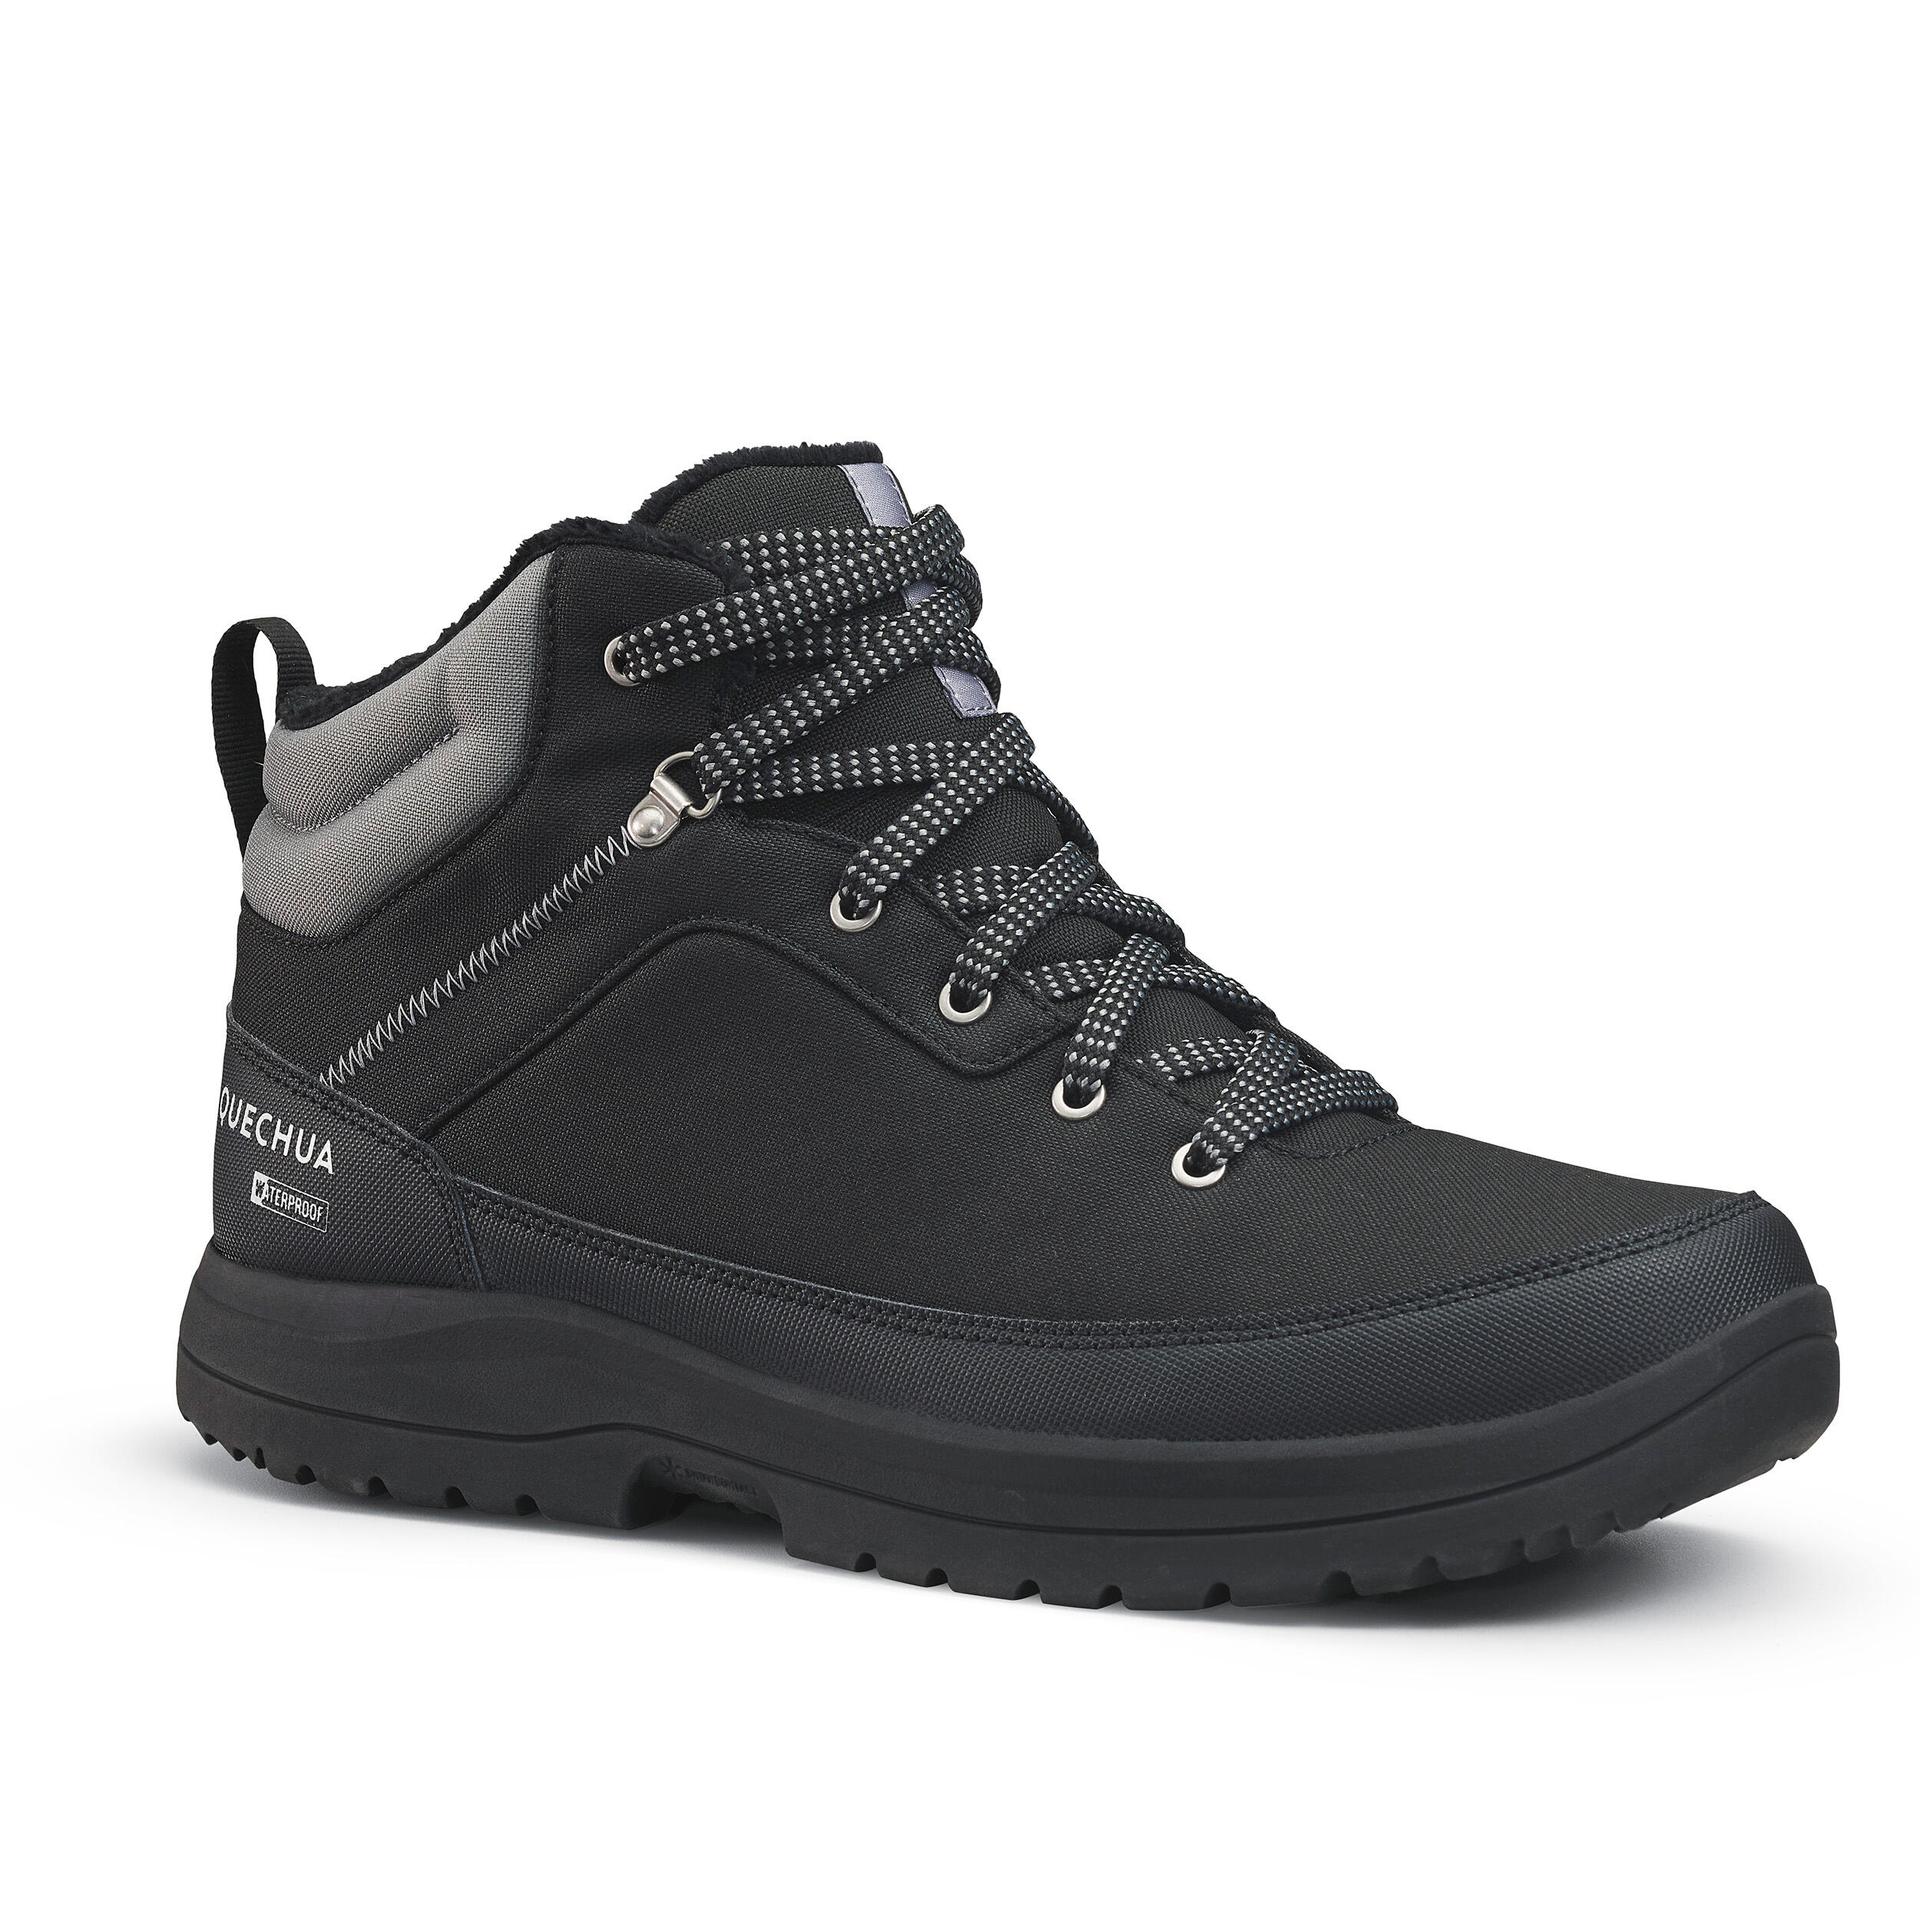 Men's warm and waterproof hiking boots - SH100 Mid-height